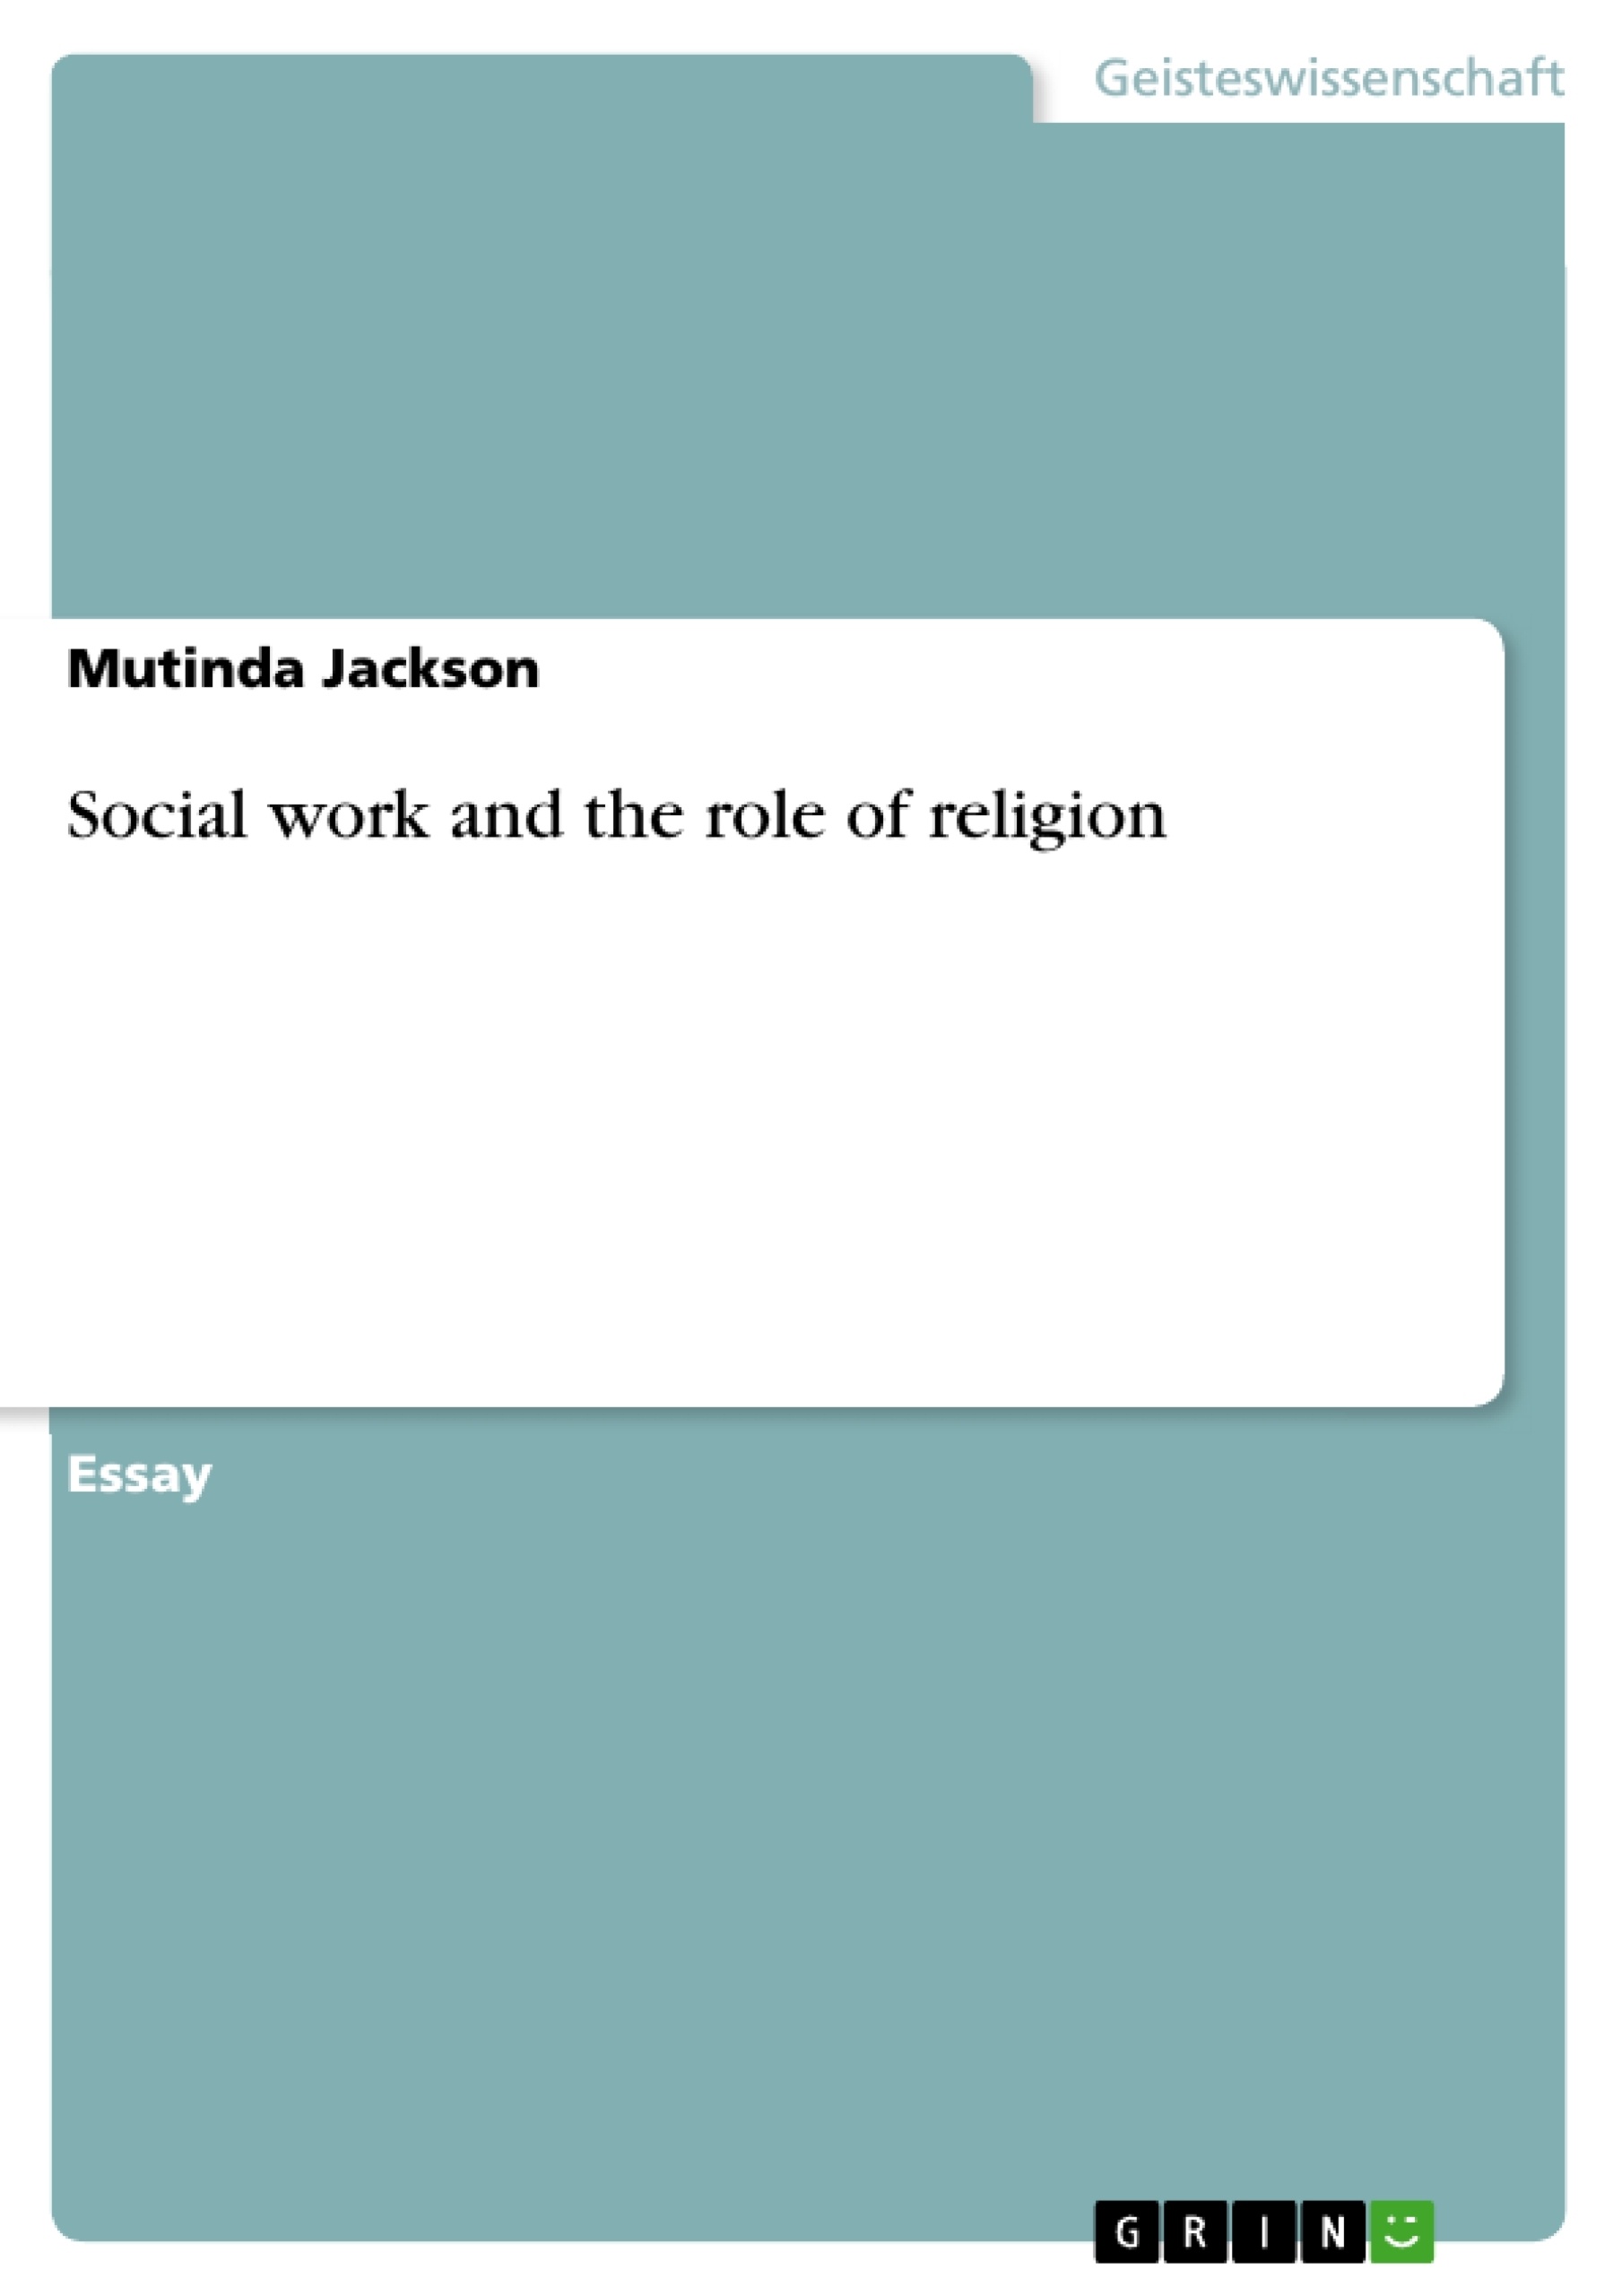 Título: Social work and the role of religion